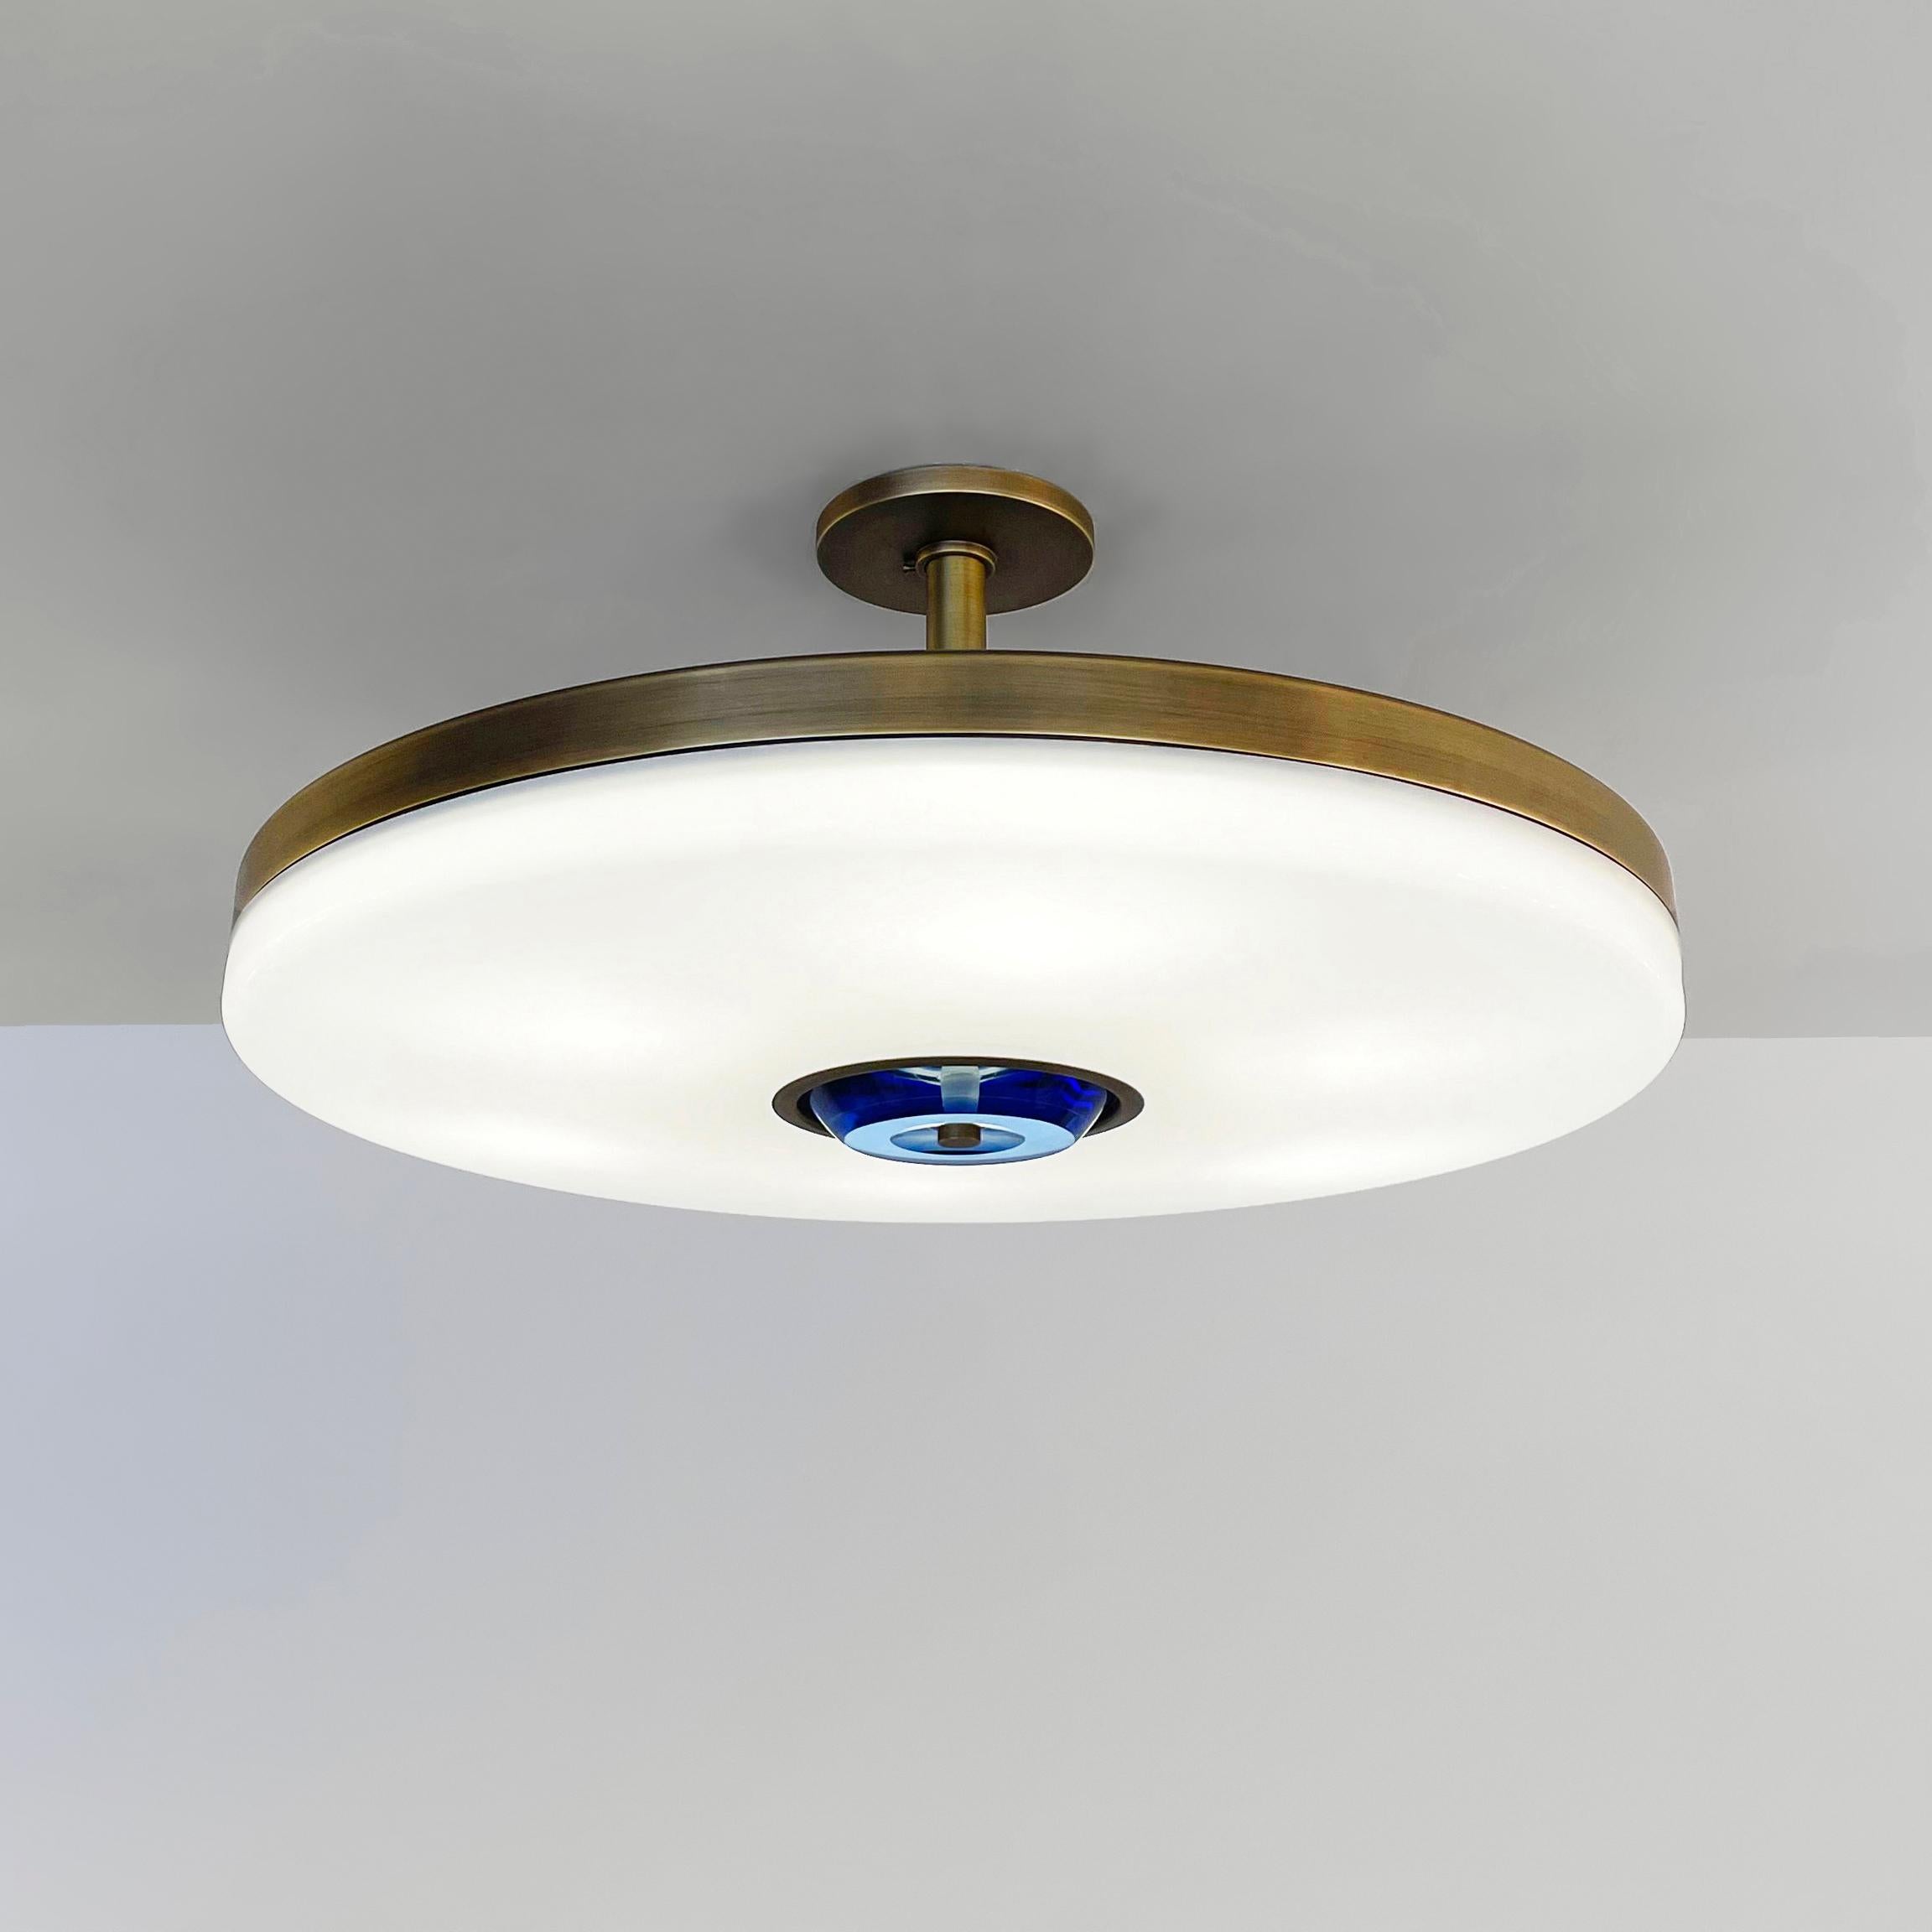 Iris Ceiling Light by Gaspare Asaro-Satin Brass Finish For Sale 2